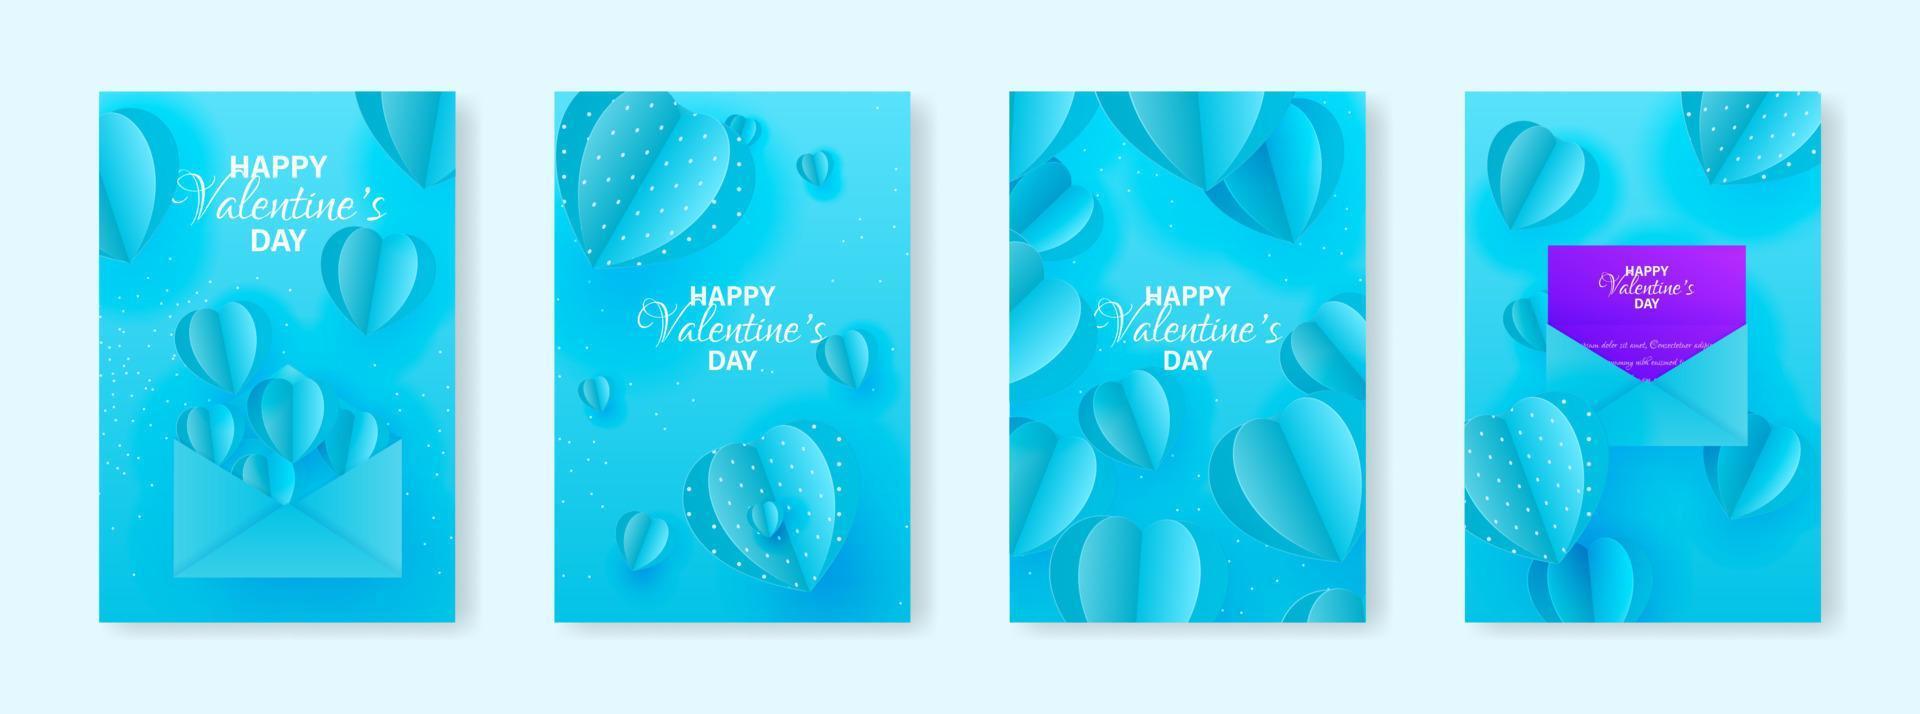 Valentine's day concept posters set. Vector illustration. 3d blue paper hearts with frame on background. Cute love sale banners or greeting cards.